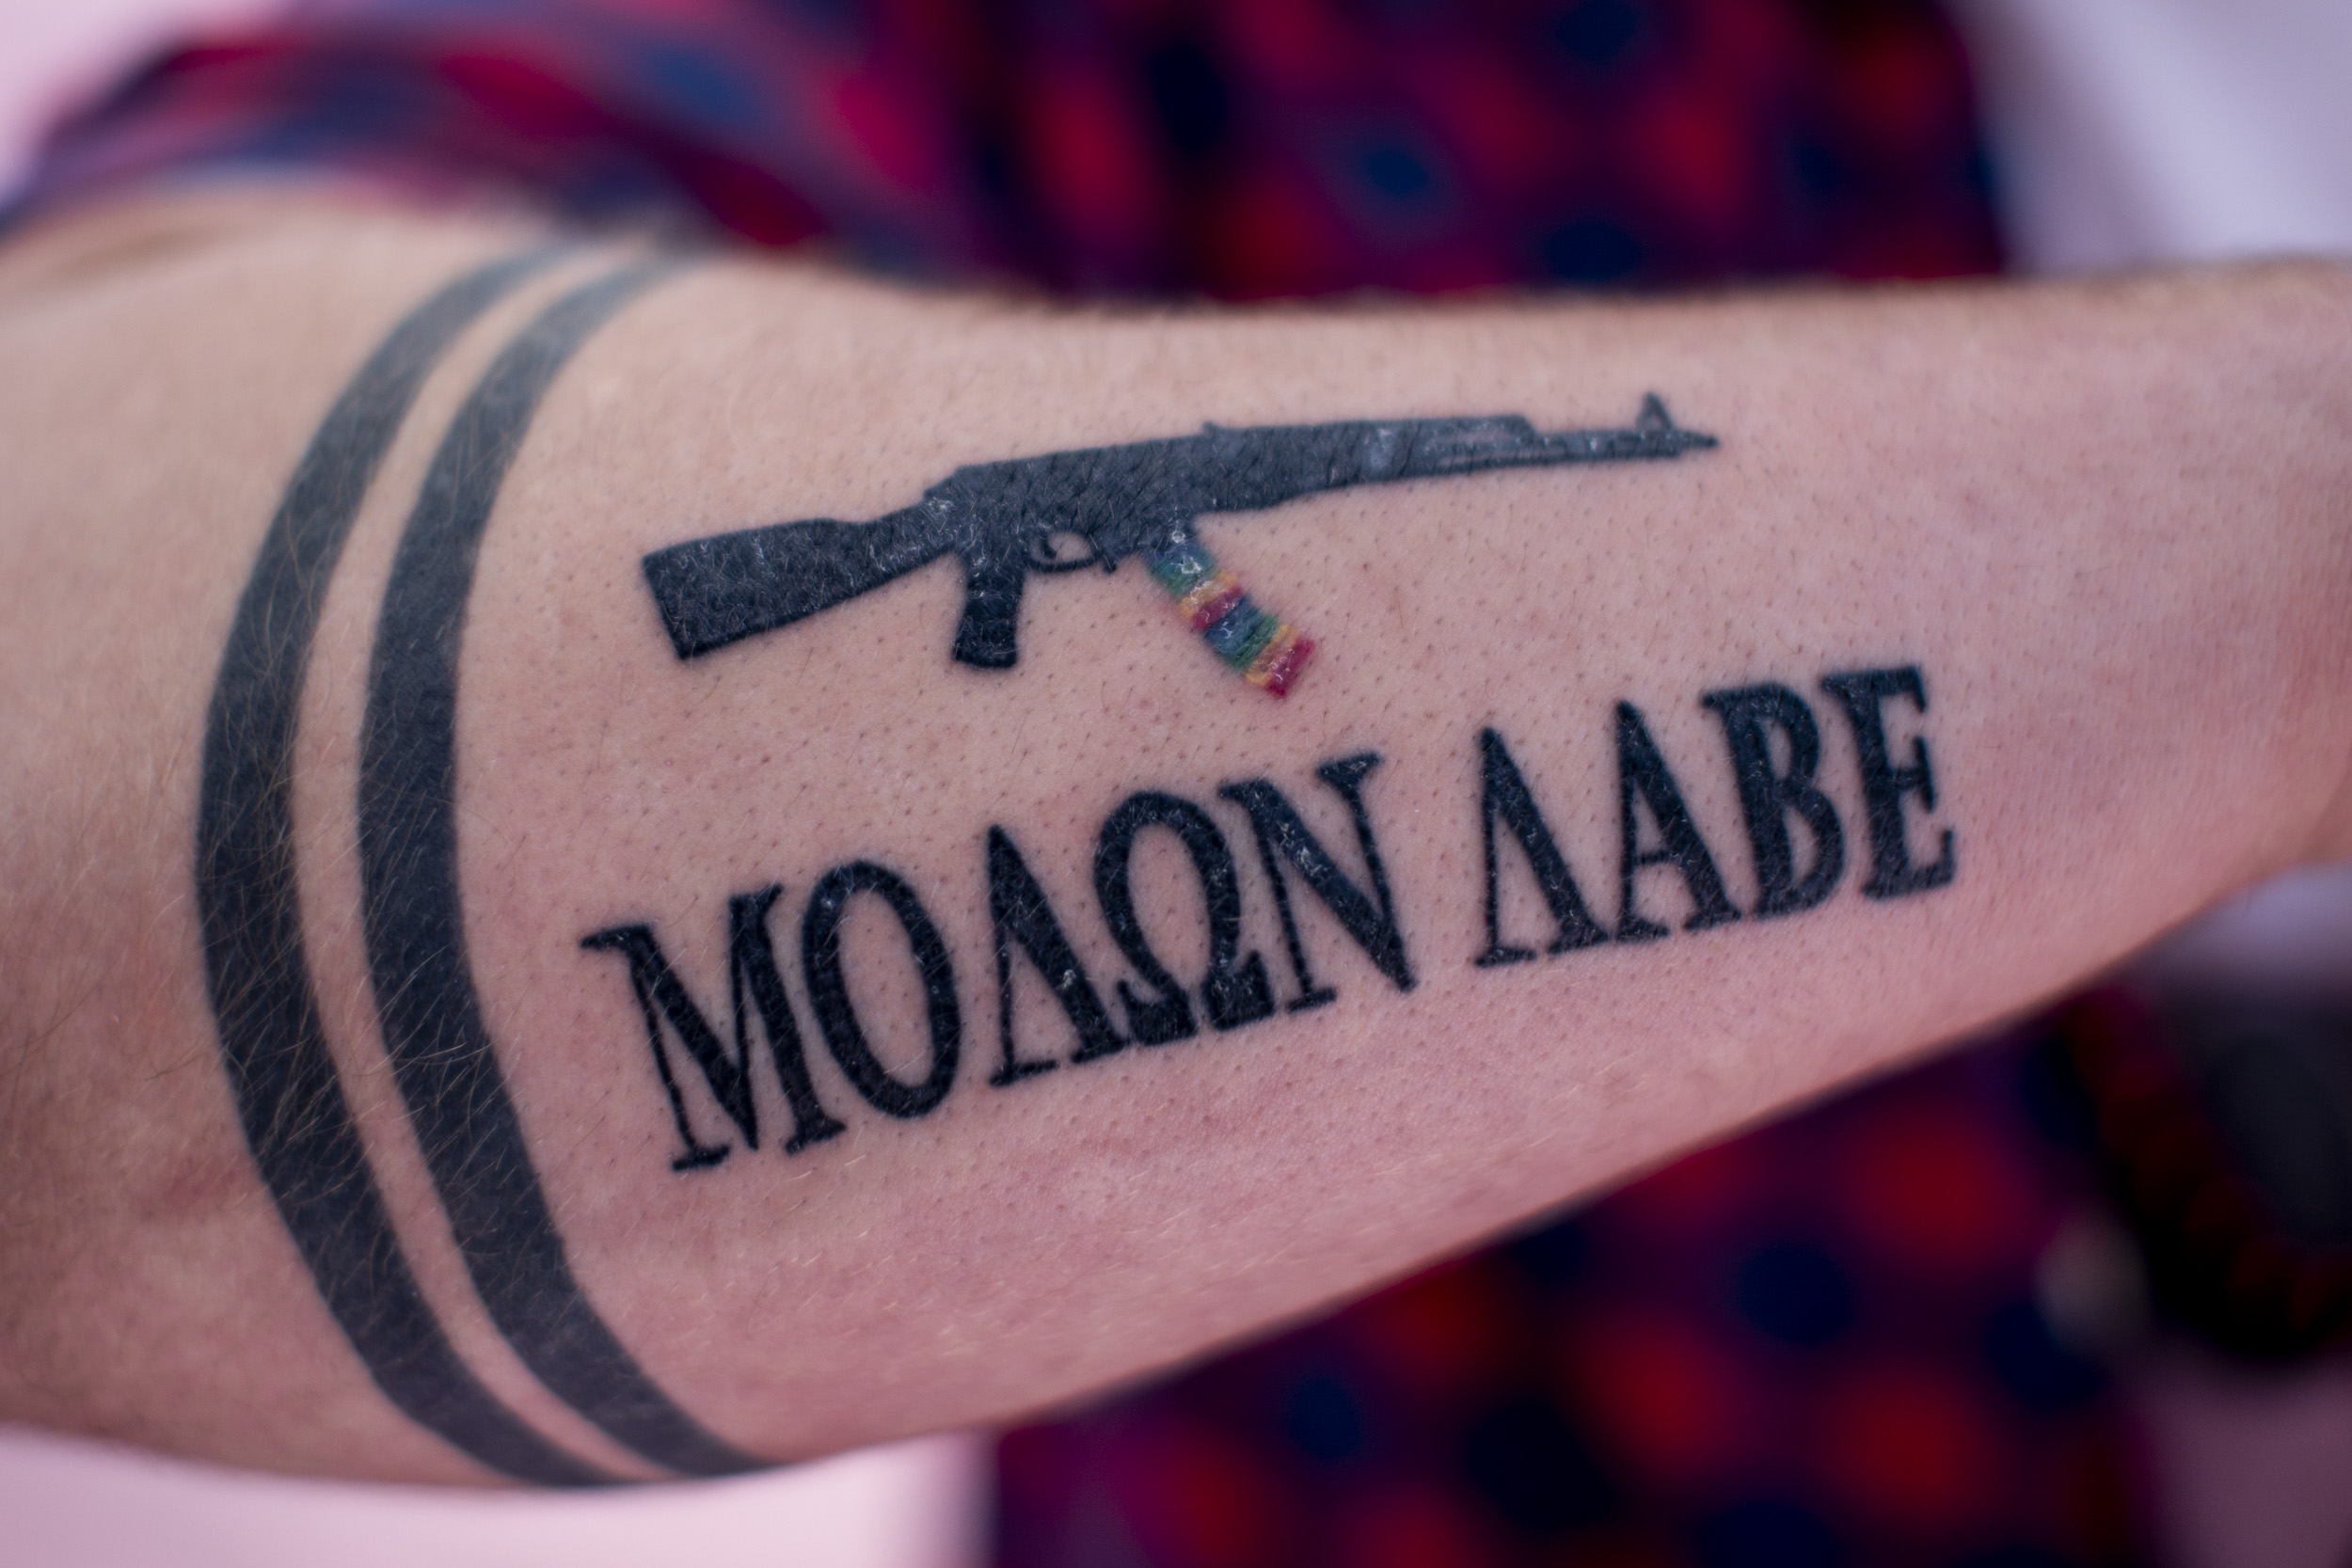 John Abbitt shows his tattoos including equality bands and the greek phrase “Molon Labe” which means “come and take it”. The phrase has been adopted by gun rights advocates as a defiant response to gun control legislation. But Abbitt says he doesn’t care how the phrase is used by the gun rights community. To him, the tattoo is a symbol of the continued fight for equality. “Still in 2019, being LGBTQ in many countries is a death sentence. As for my tattoos, I proudly wear on my arm what it means to me - that equality and love is a God given right that I will fight to protect even if that means fighting a mob trying to throw me and my husband off a roof for loving each other,” he says. “Like if you want my equality, come and take it.” (Photo by Dorothy Edwards/Crosscut)